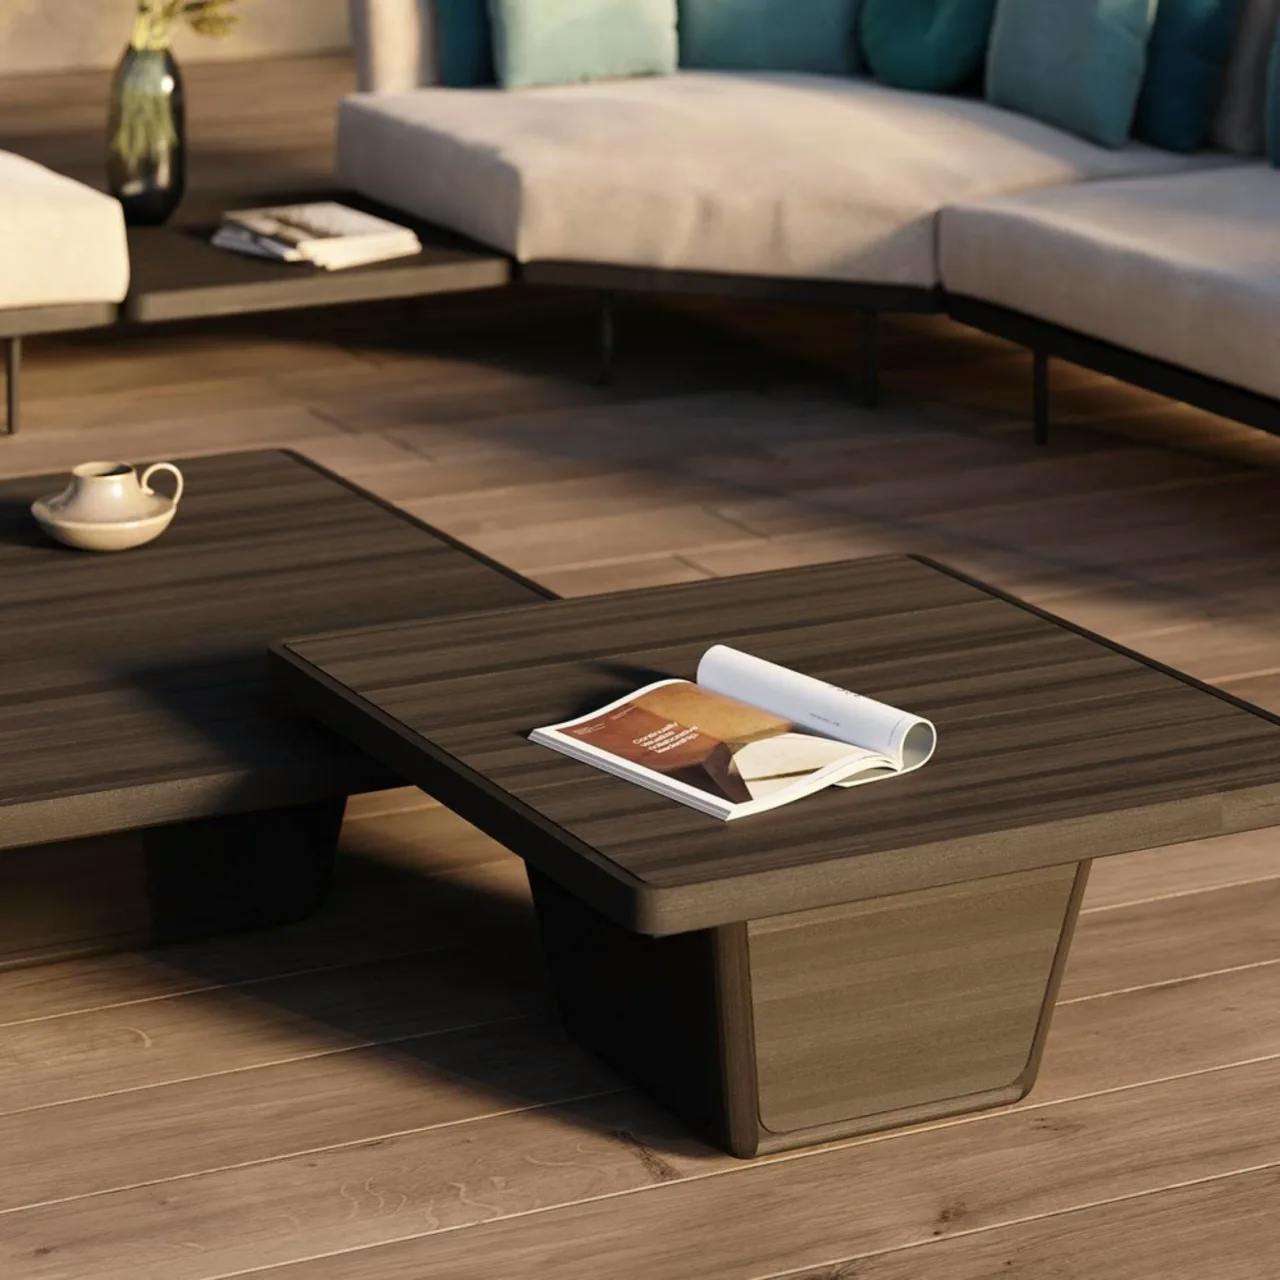 moody nero: nero scuro finish adds depth to your outdoor setting